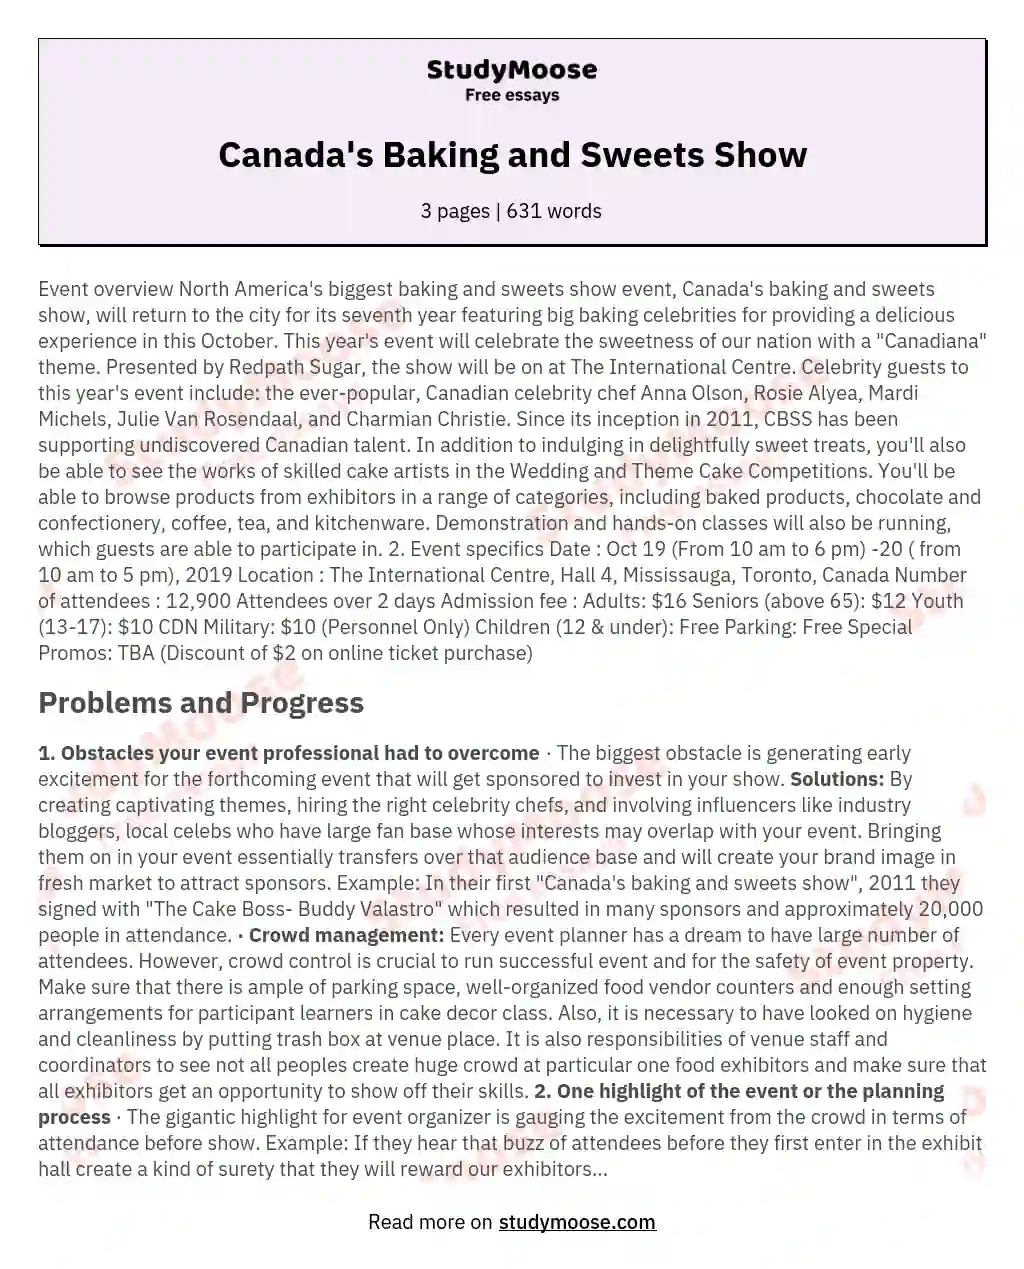 Canada's Baking and Sweets Show essay